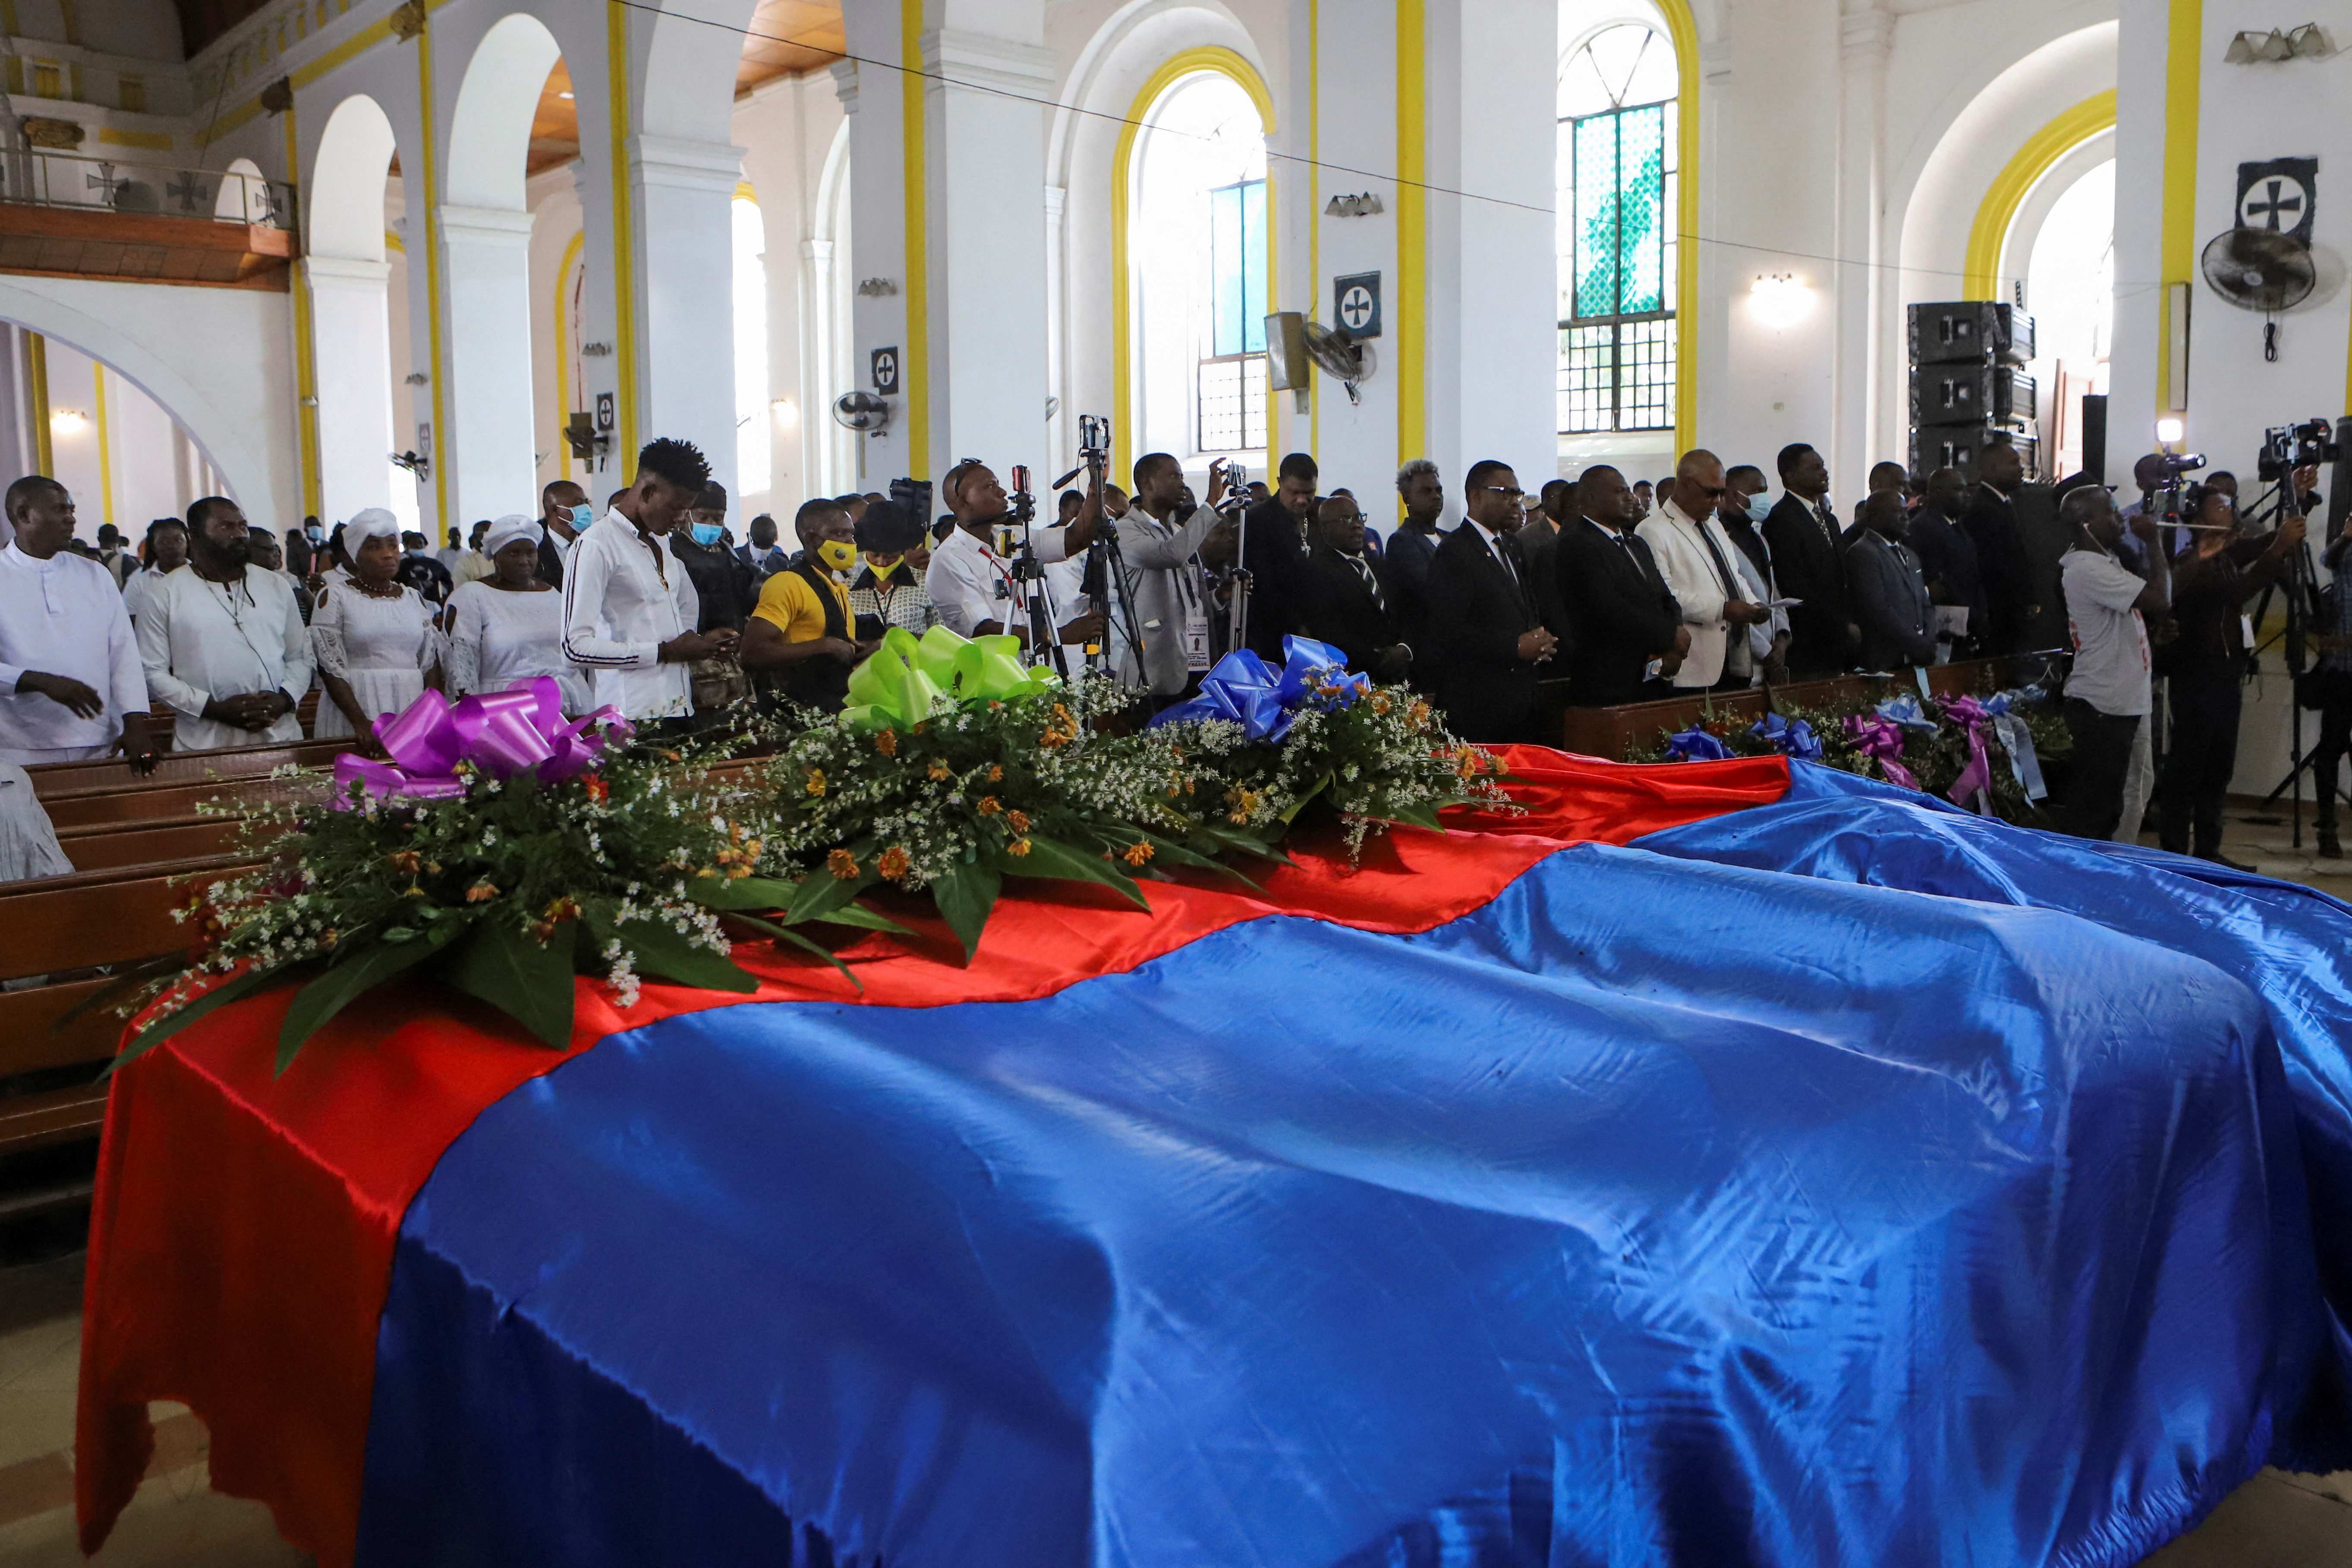 Caskets draped in a Haitian flag are displayed at a mass funeral for victims of a fuel truck explosion, in Cap Haitien, Haiti December 21, 2021. REUTERS/Ralph Tedy Erol